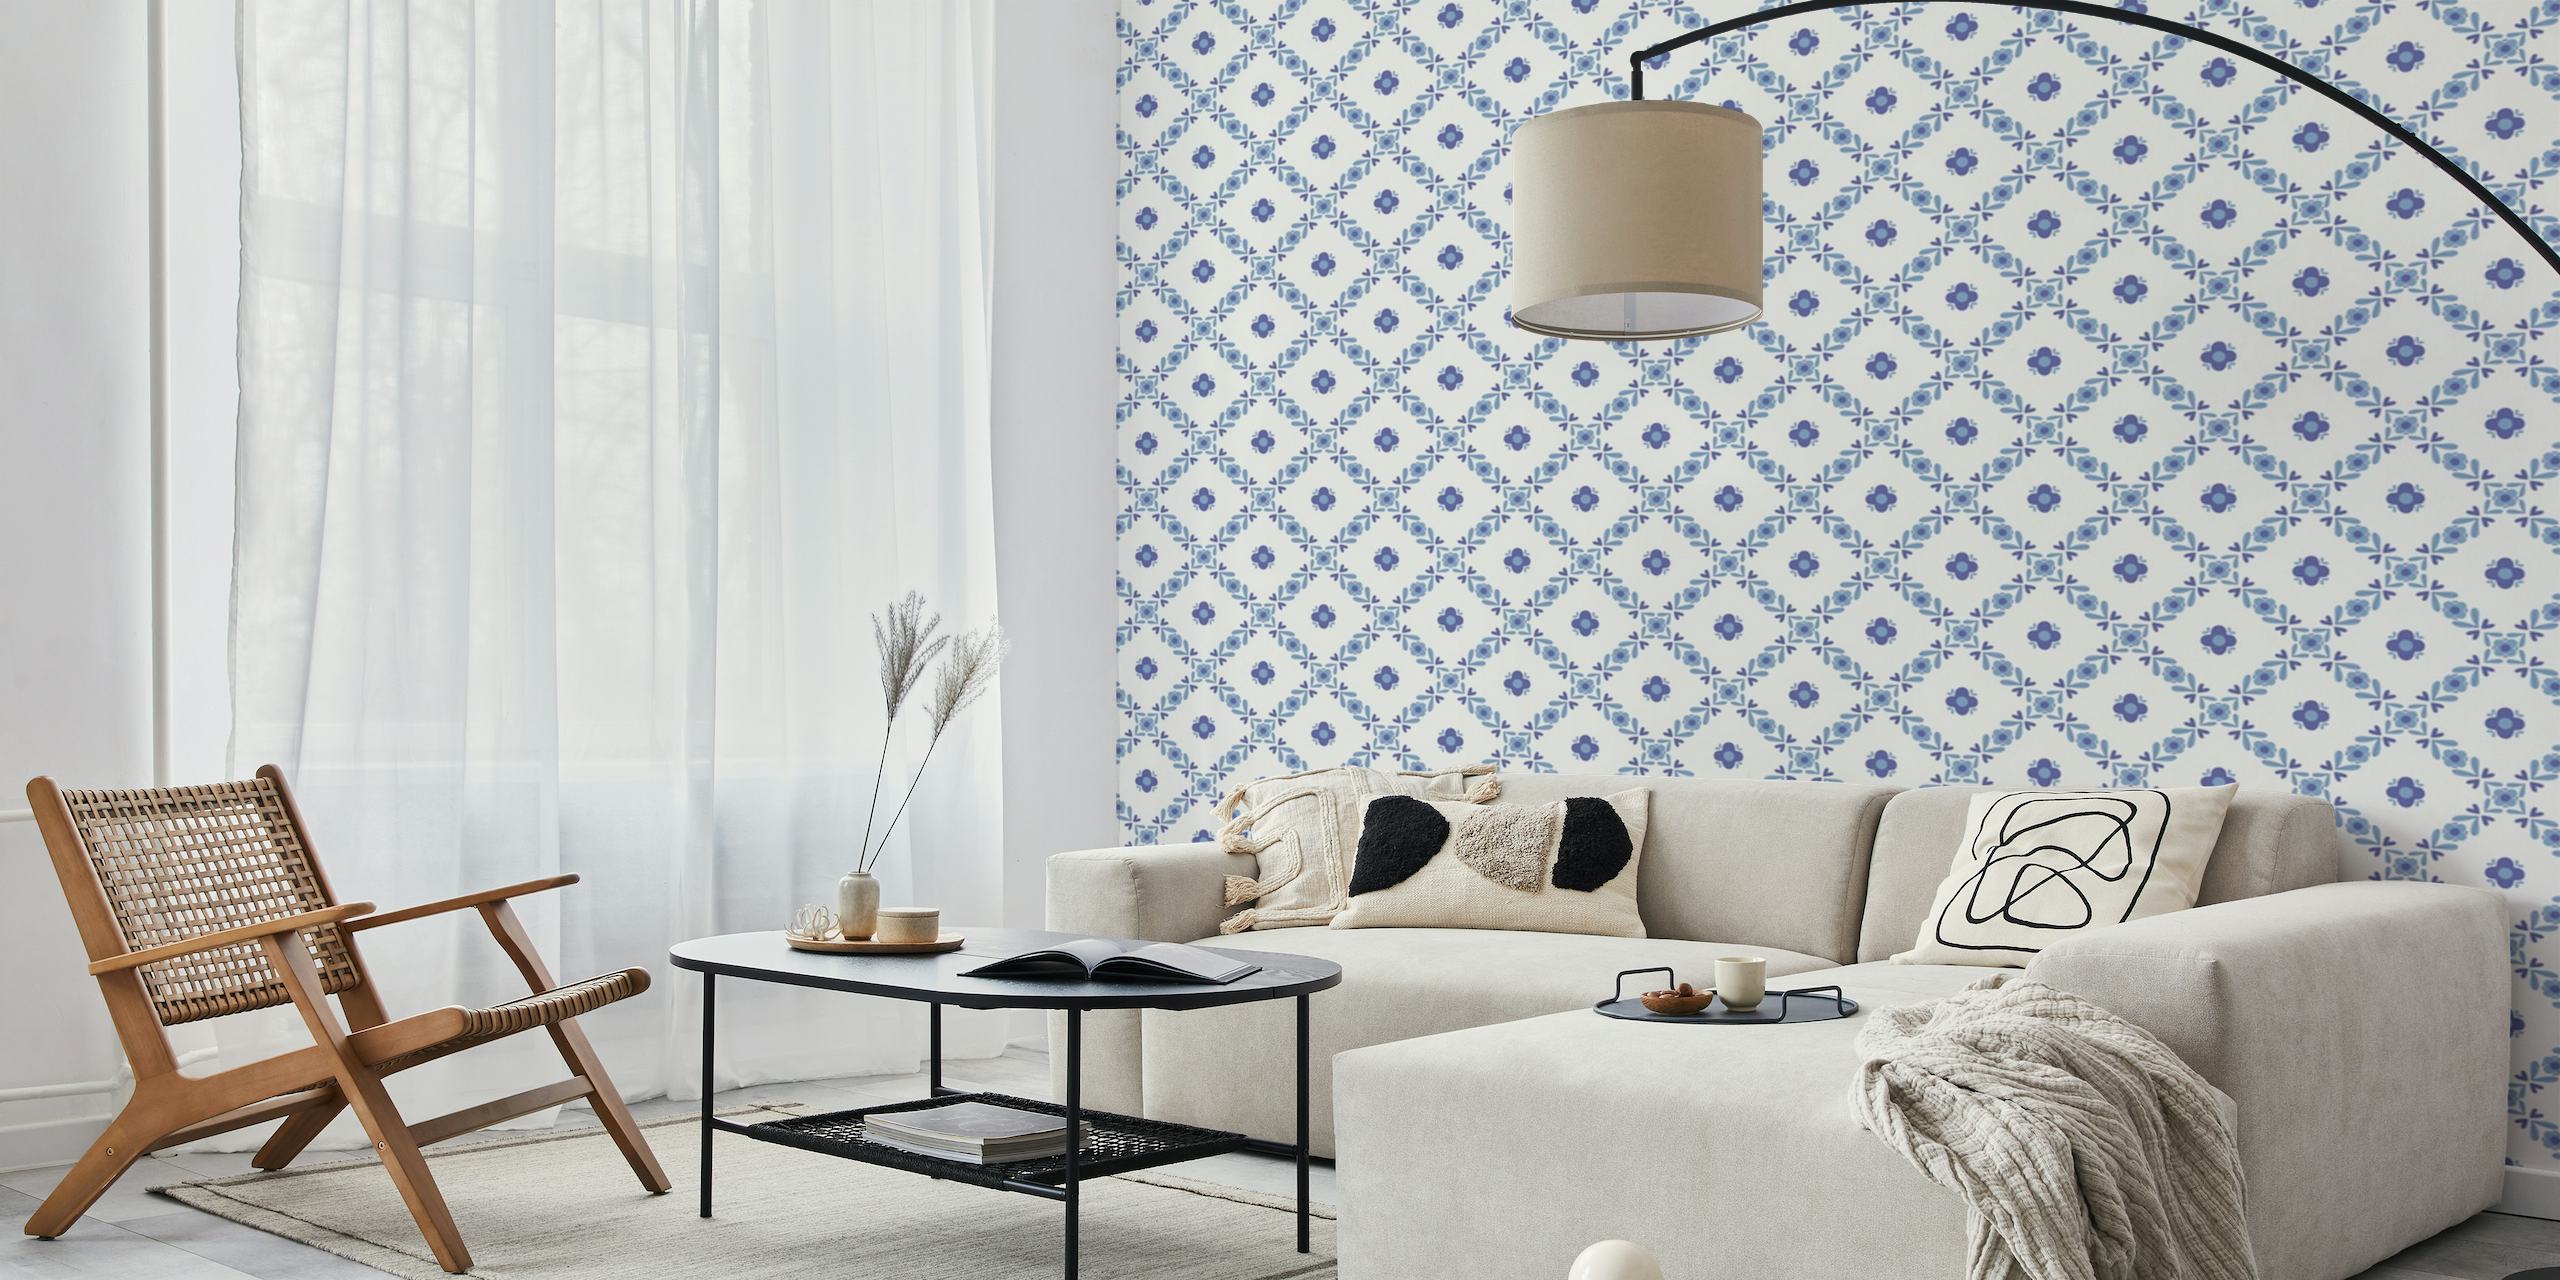 Retro-inspired blue tile pattern wall mural with geometric shapes